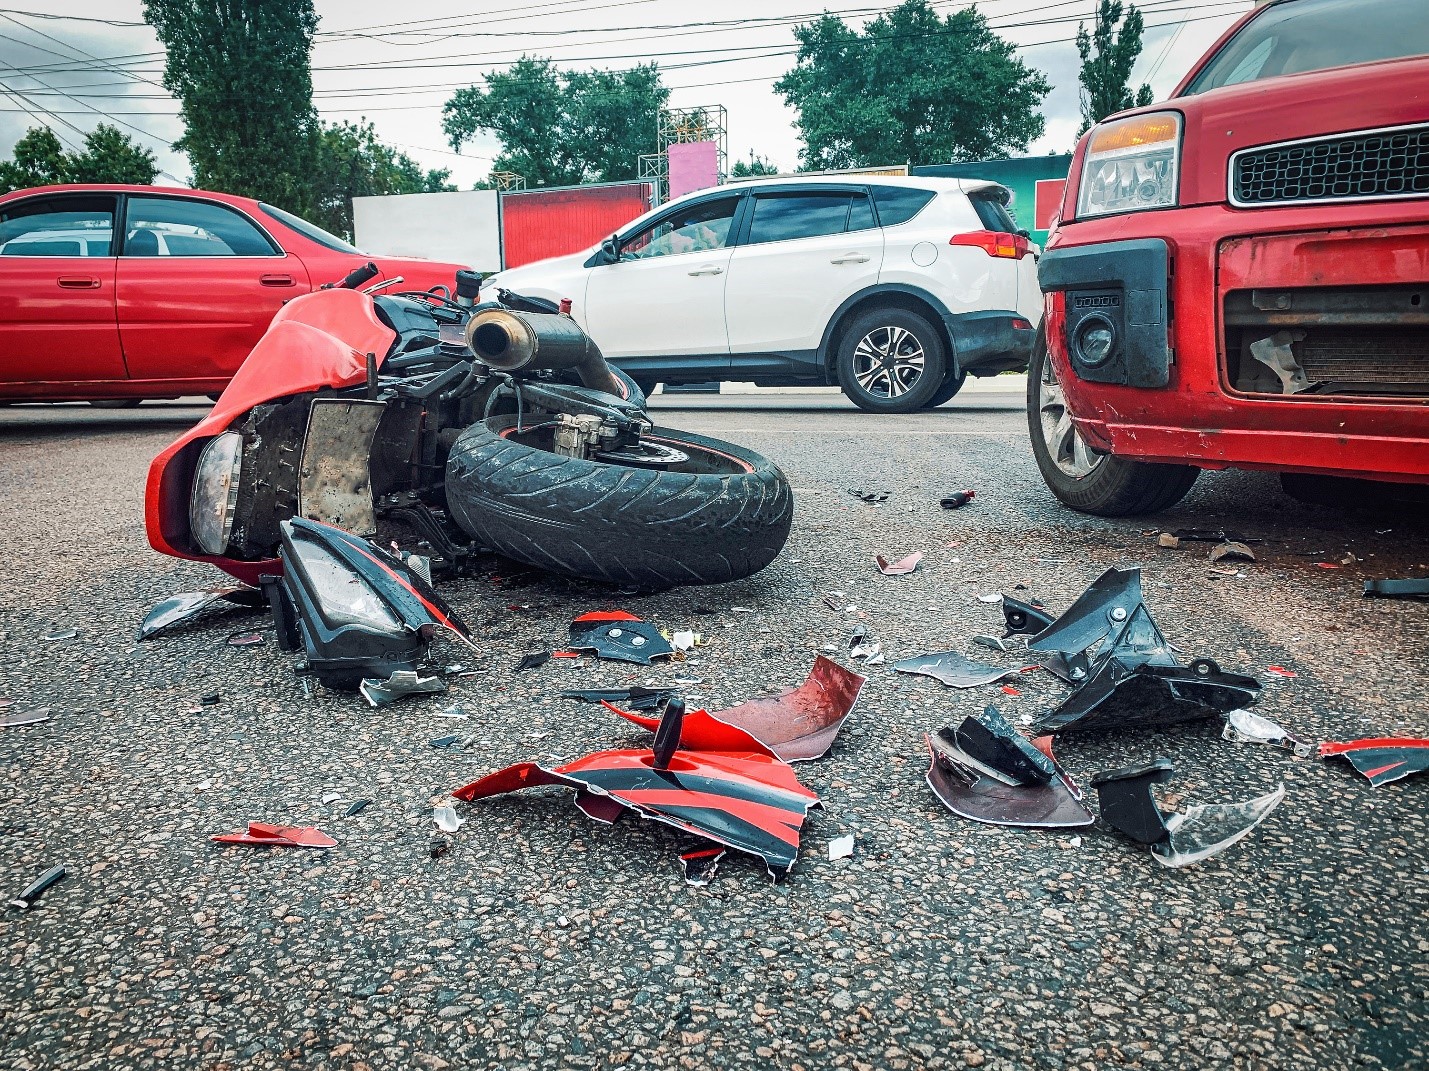 What Causes Motorcycle Accidents?